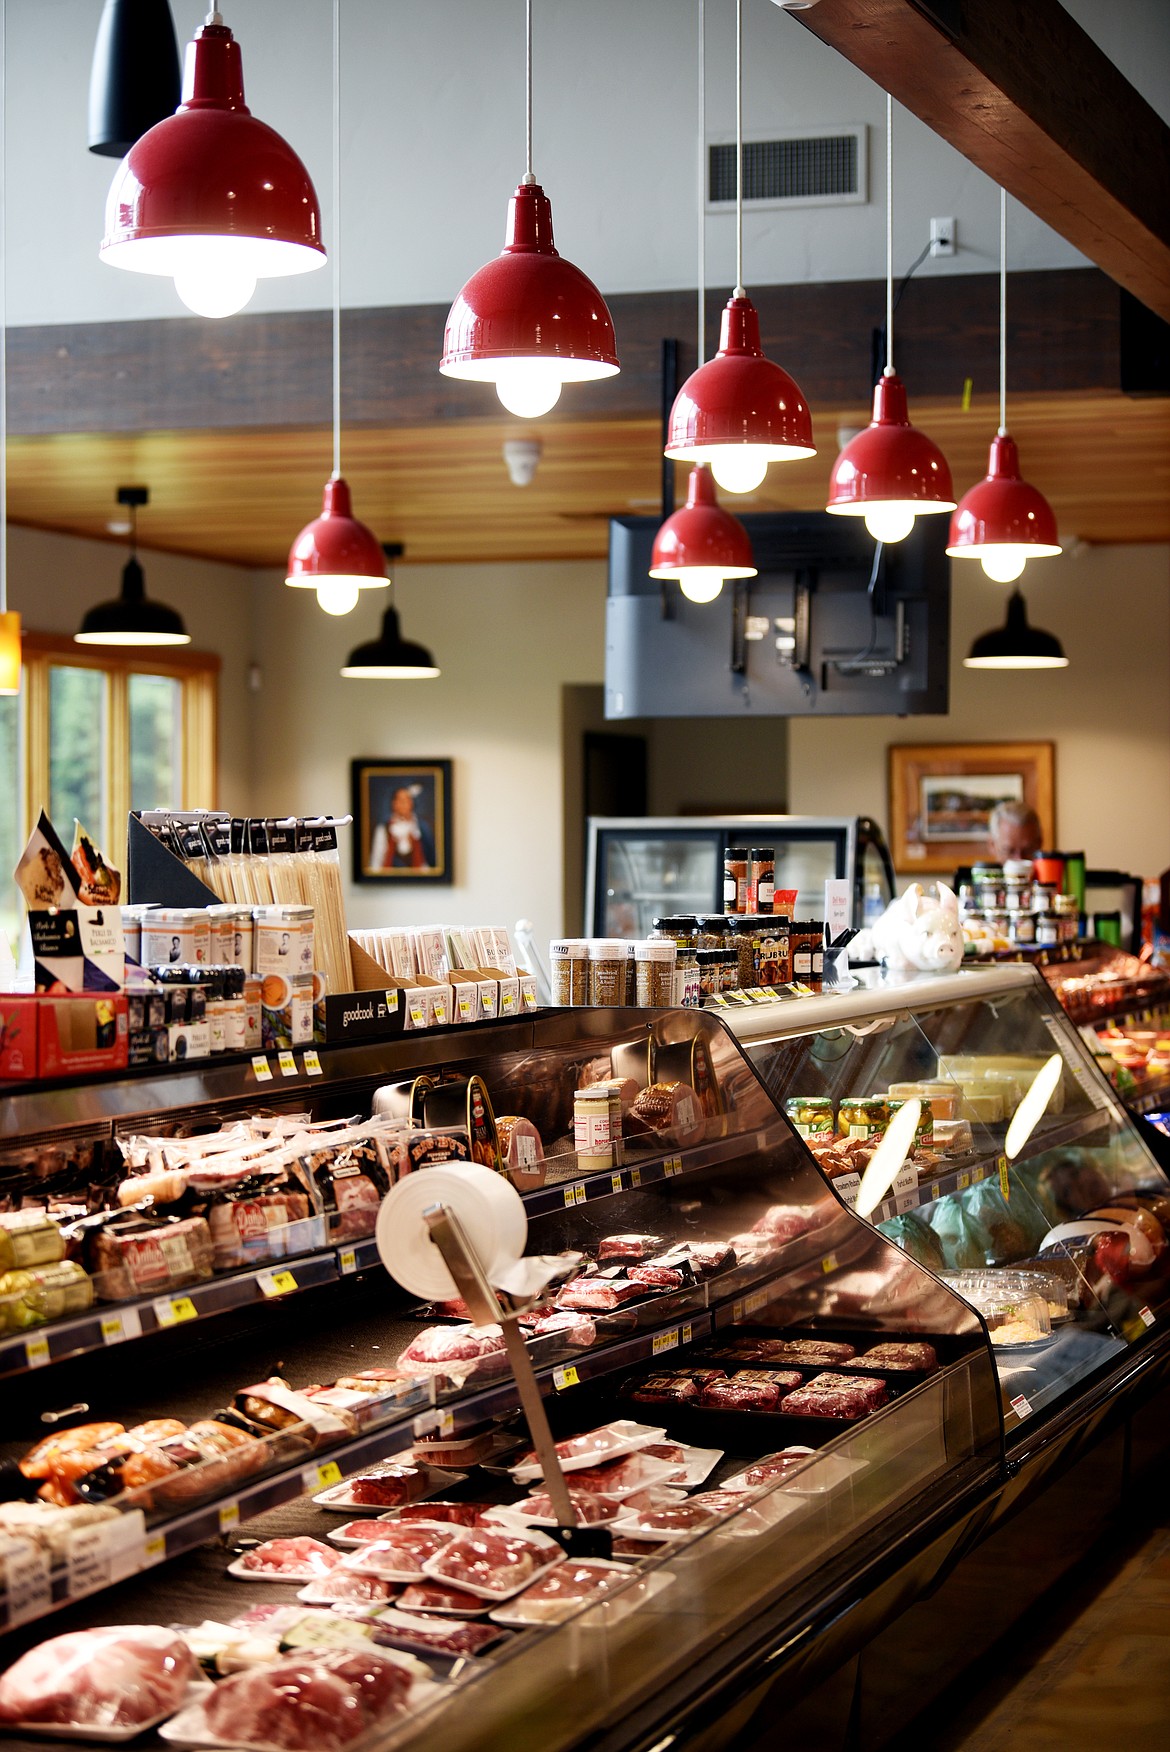 The Mission Mountain Mercantile features an extensive meat department.